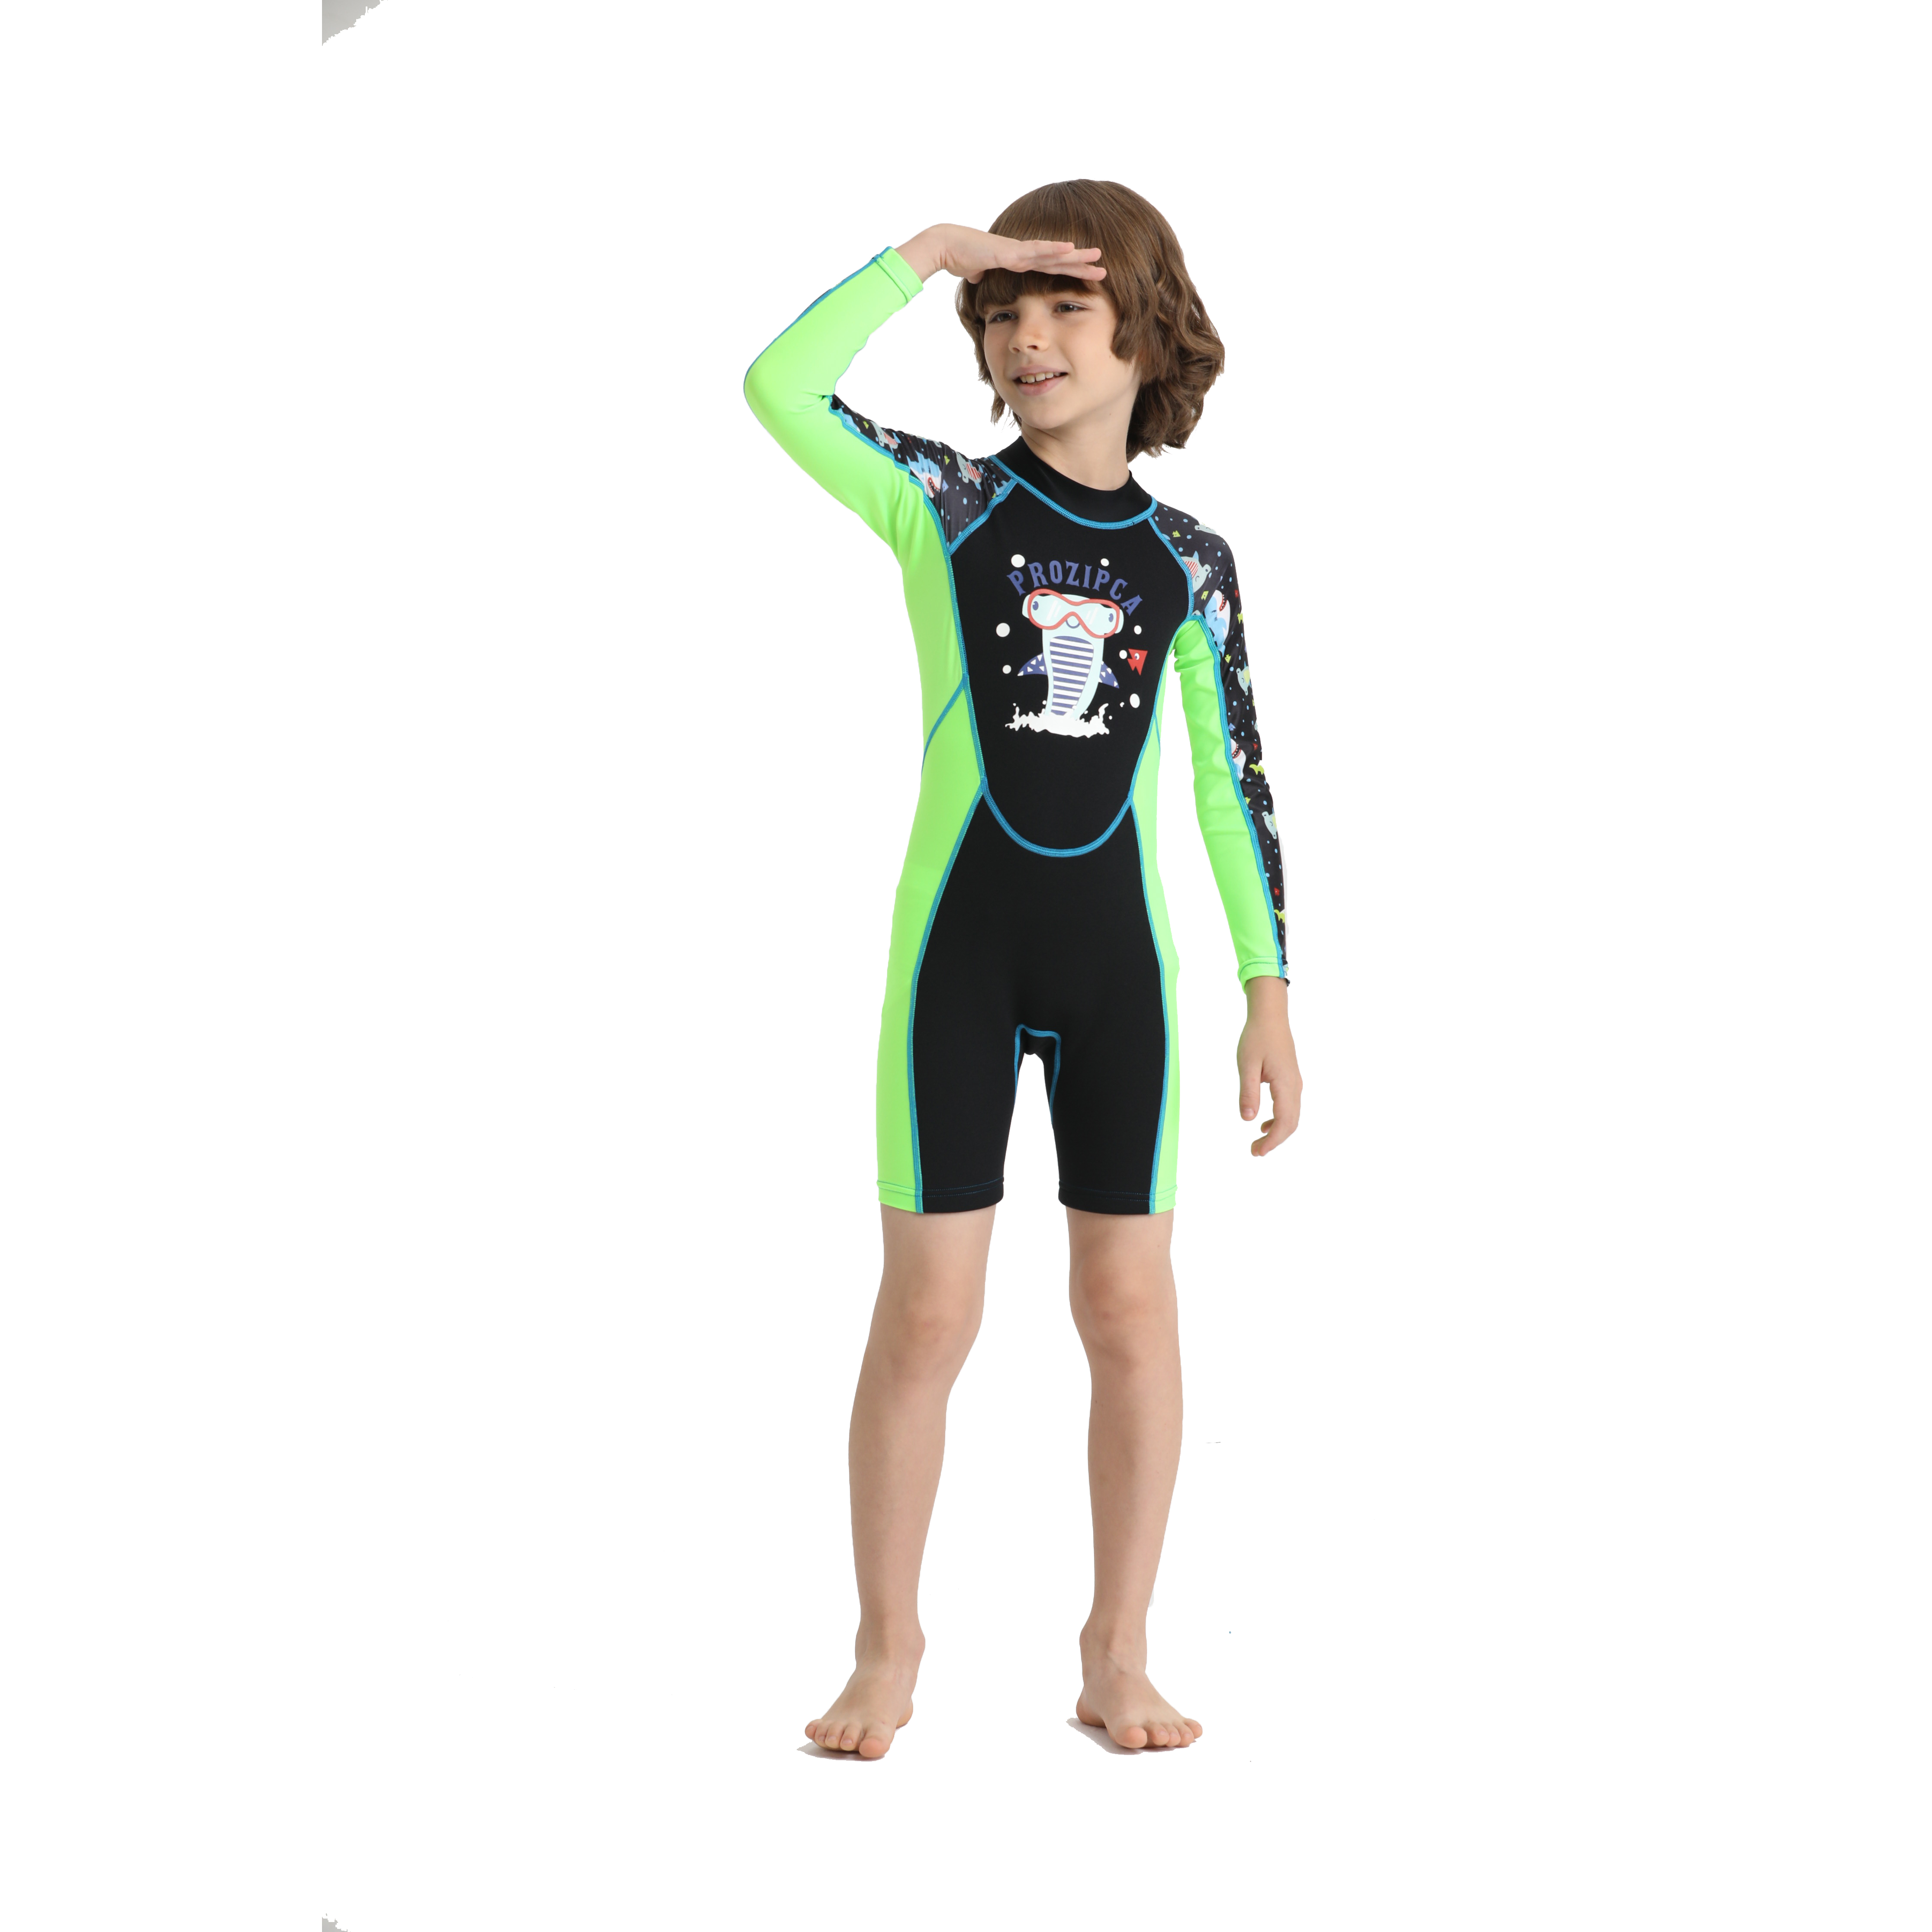 Customized Water Sports Beach Swimsuits Children Wetsuits Shorty Boys Neoprene Kids Surfing Snorkeling Wet Suit